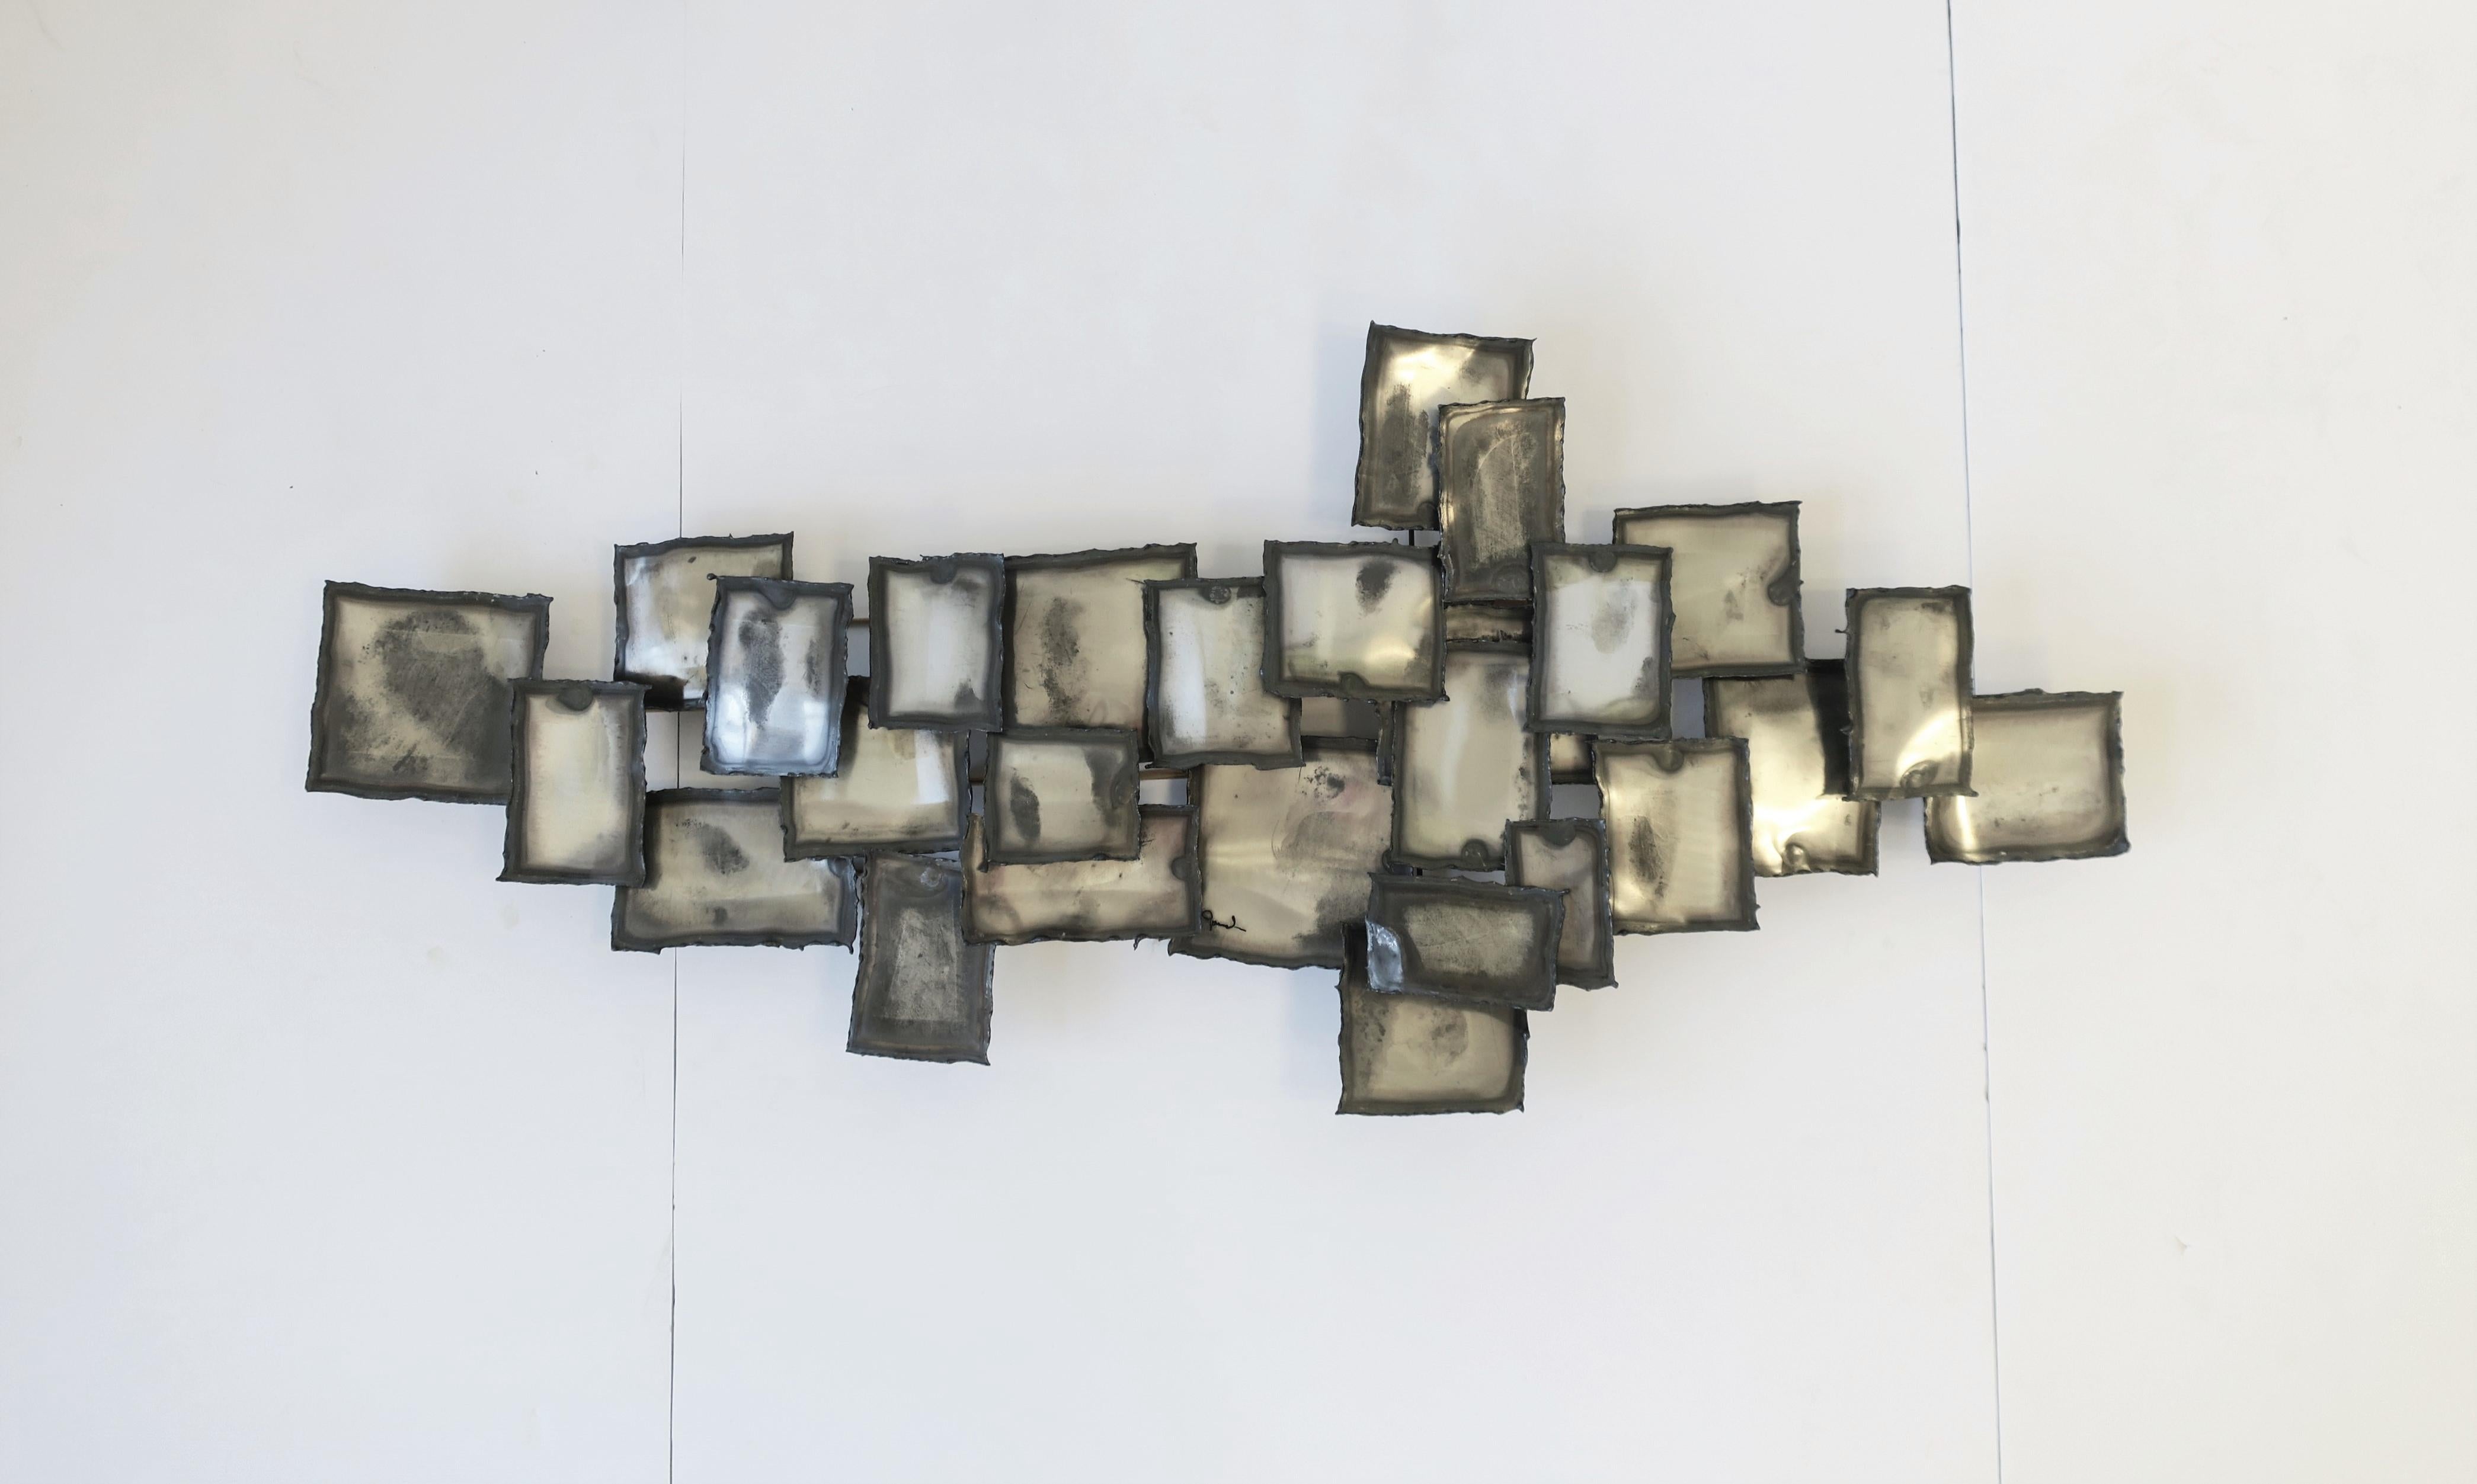 A beautiful Mid-Century Modern period grey and silver metal wall art sculpture in the style of designers Curtis Jere, signed by artist, circa mid-20th century, USA. A geometric wall all sculpture piece, hand-crafted, in varying shades of grey/gray